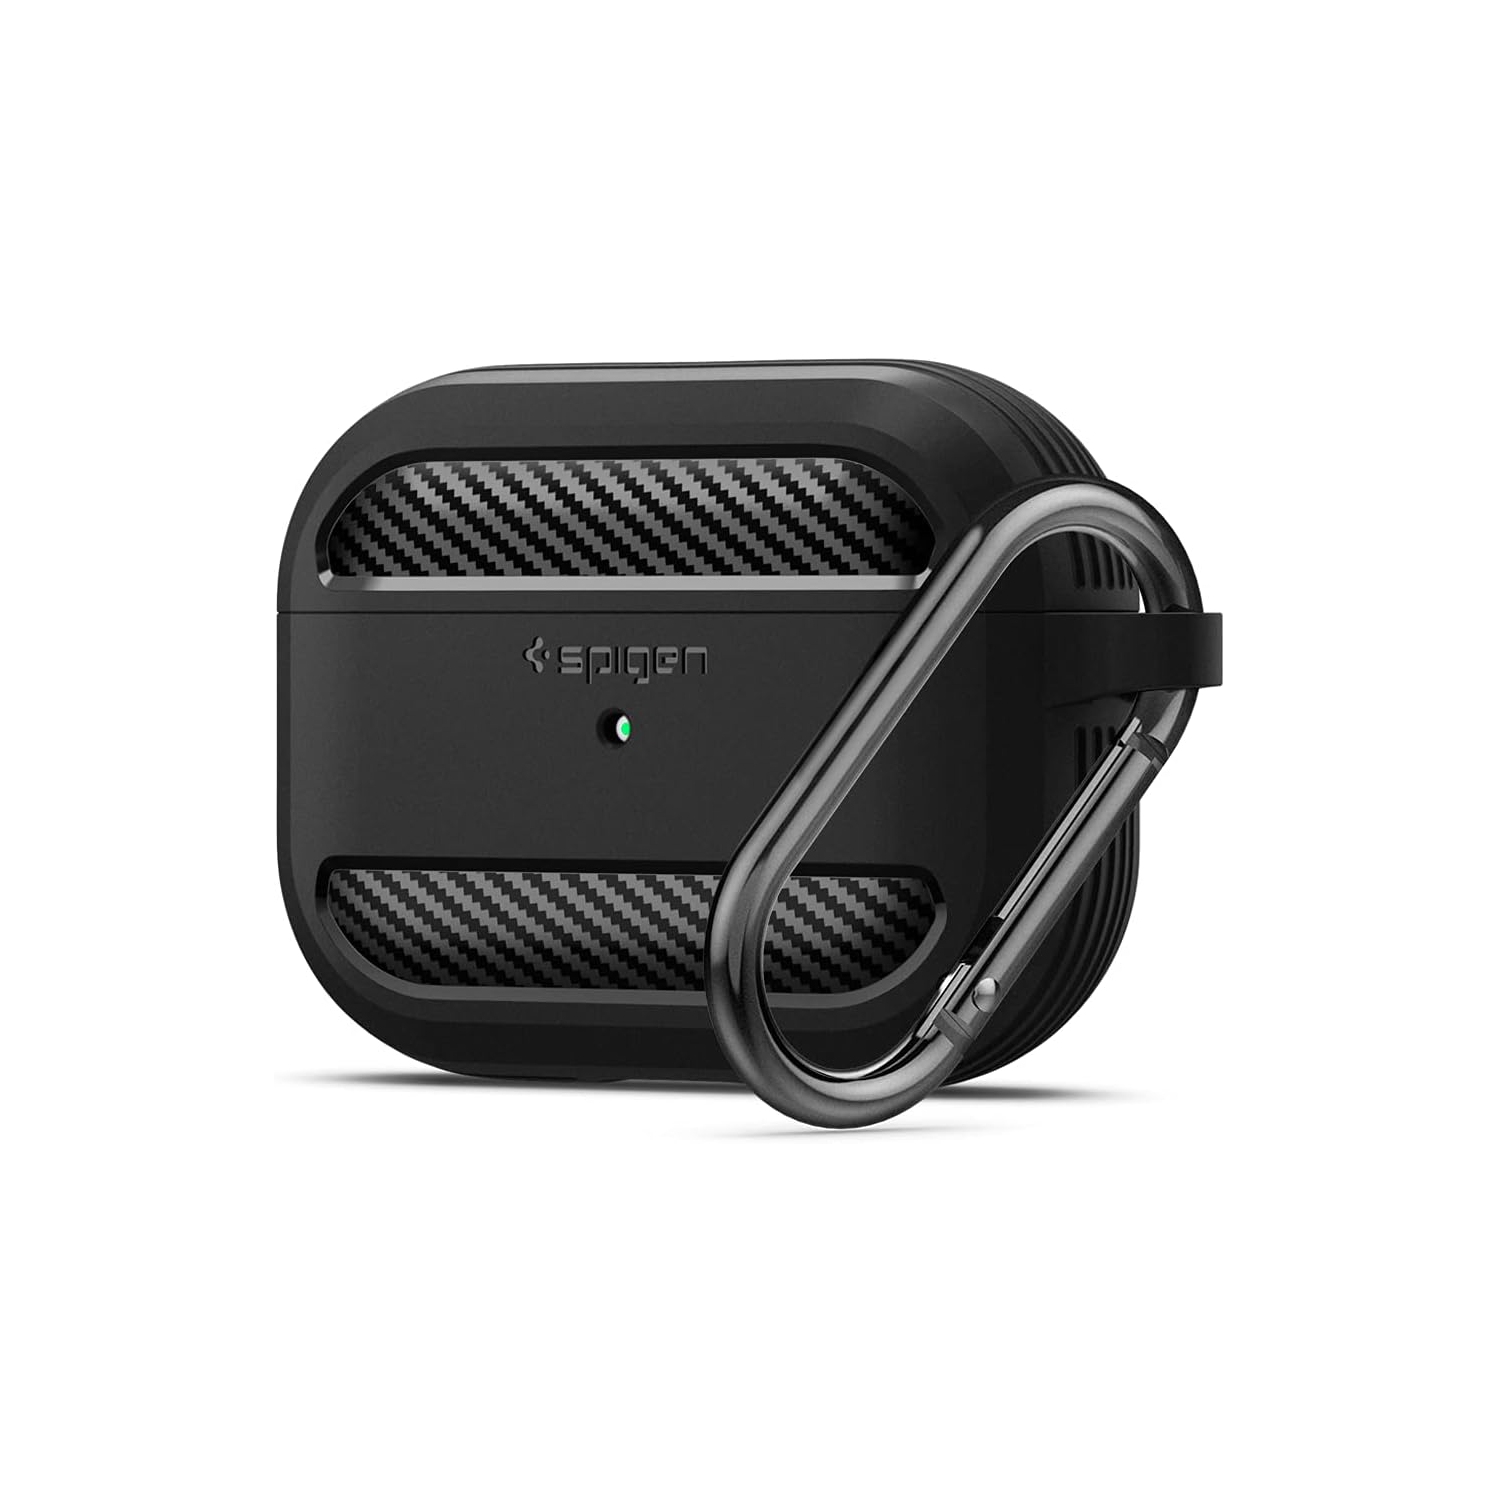 Spigen Rugged Armor Designed for Airpods Pro Case Cover Protective Airpods Pro Case with Keychain - Matte Black